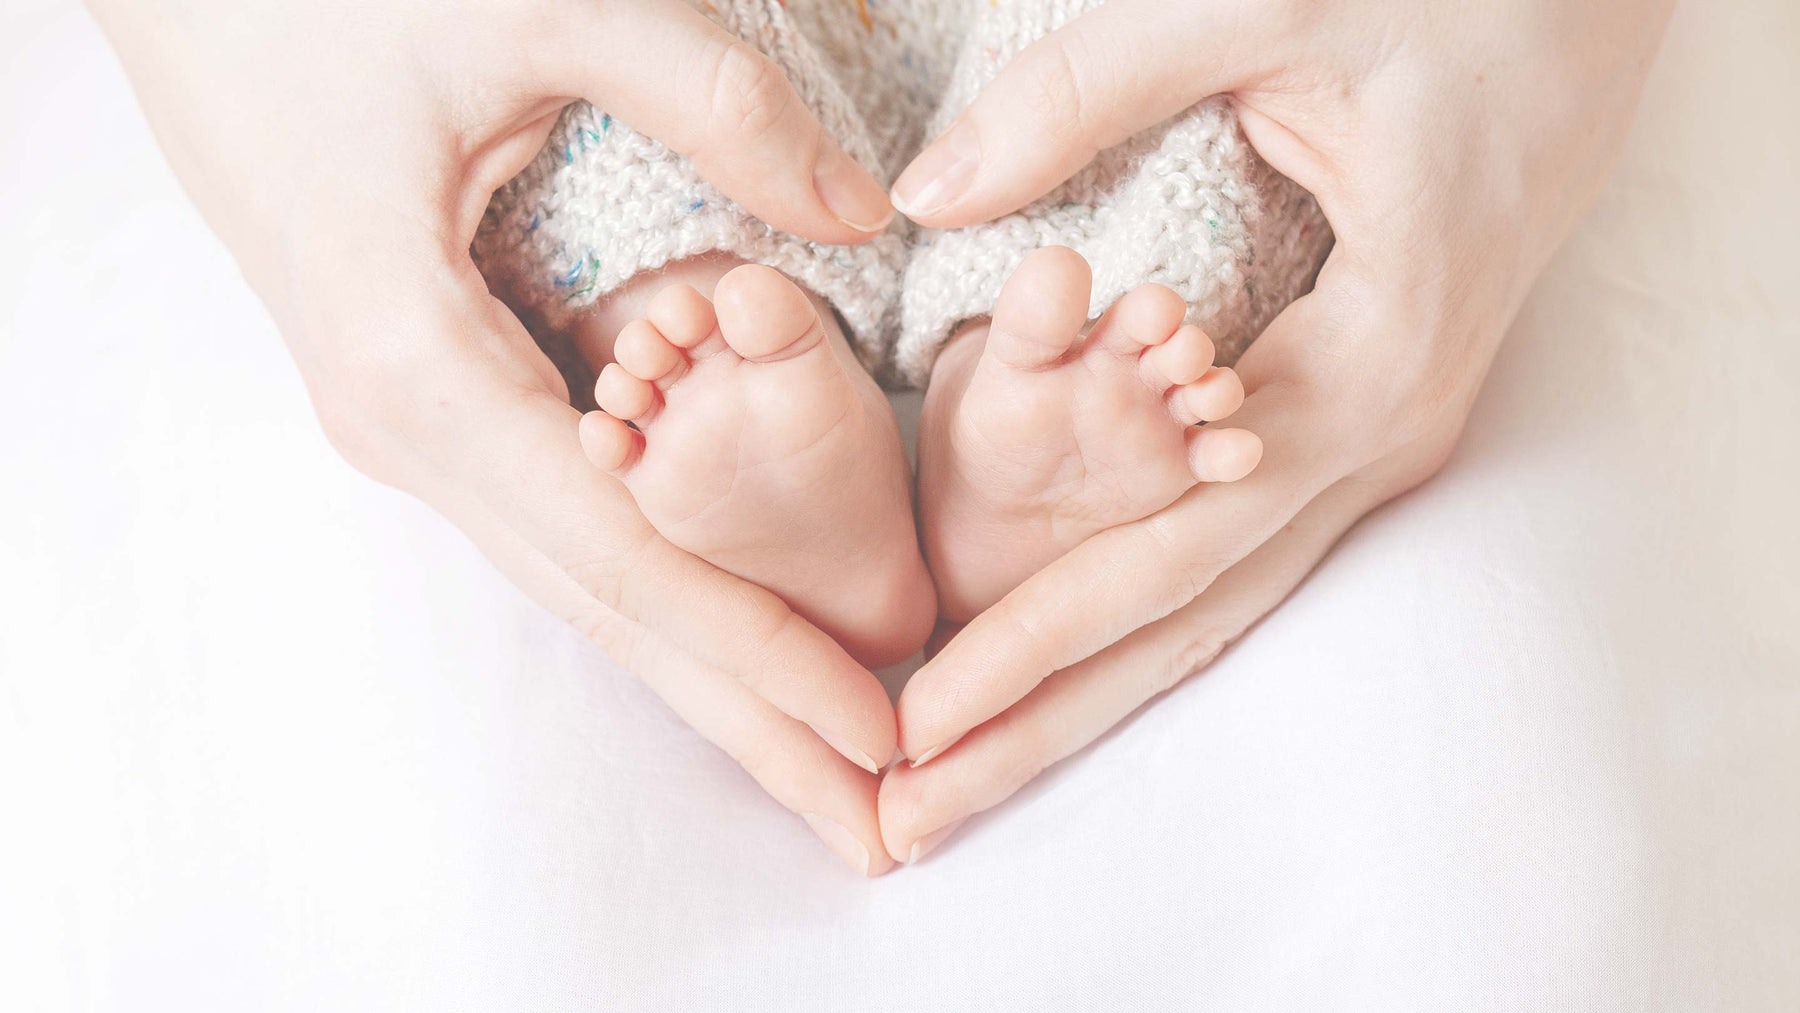 A woman's hands cupping a baby's feet in a heart shape